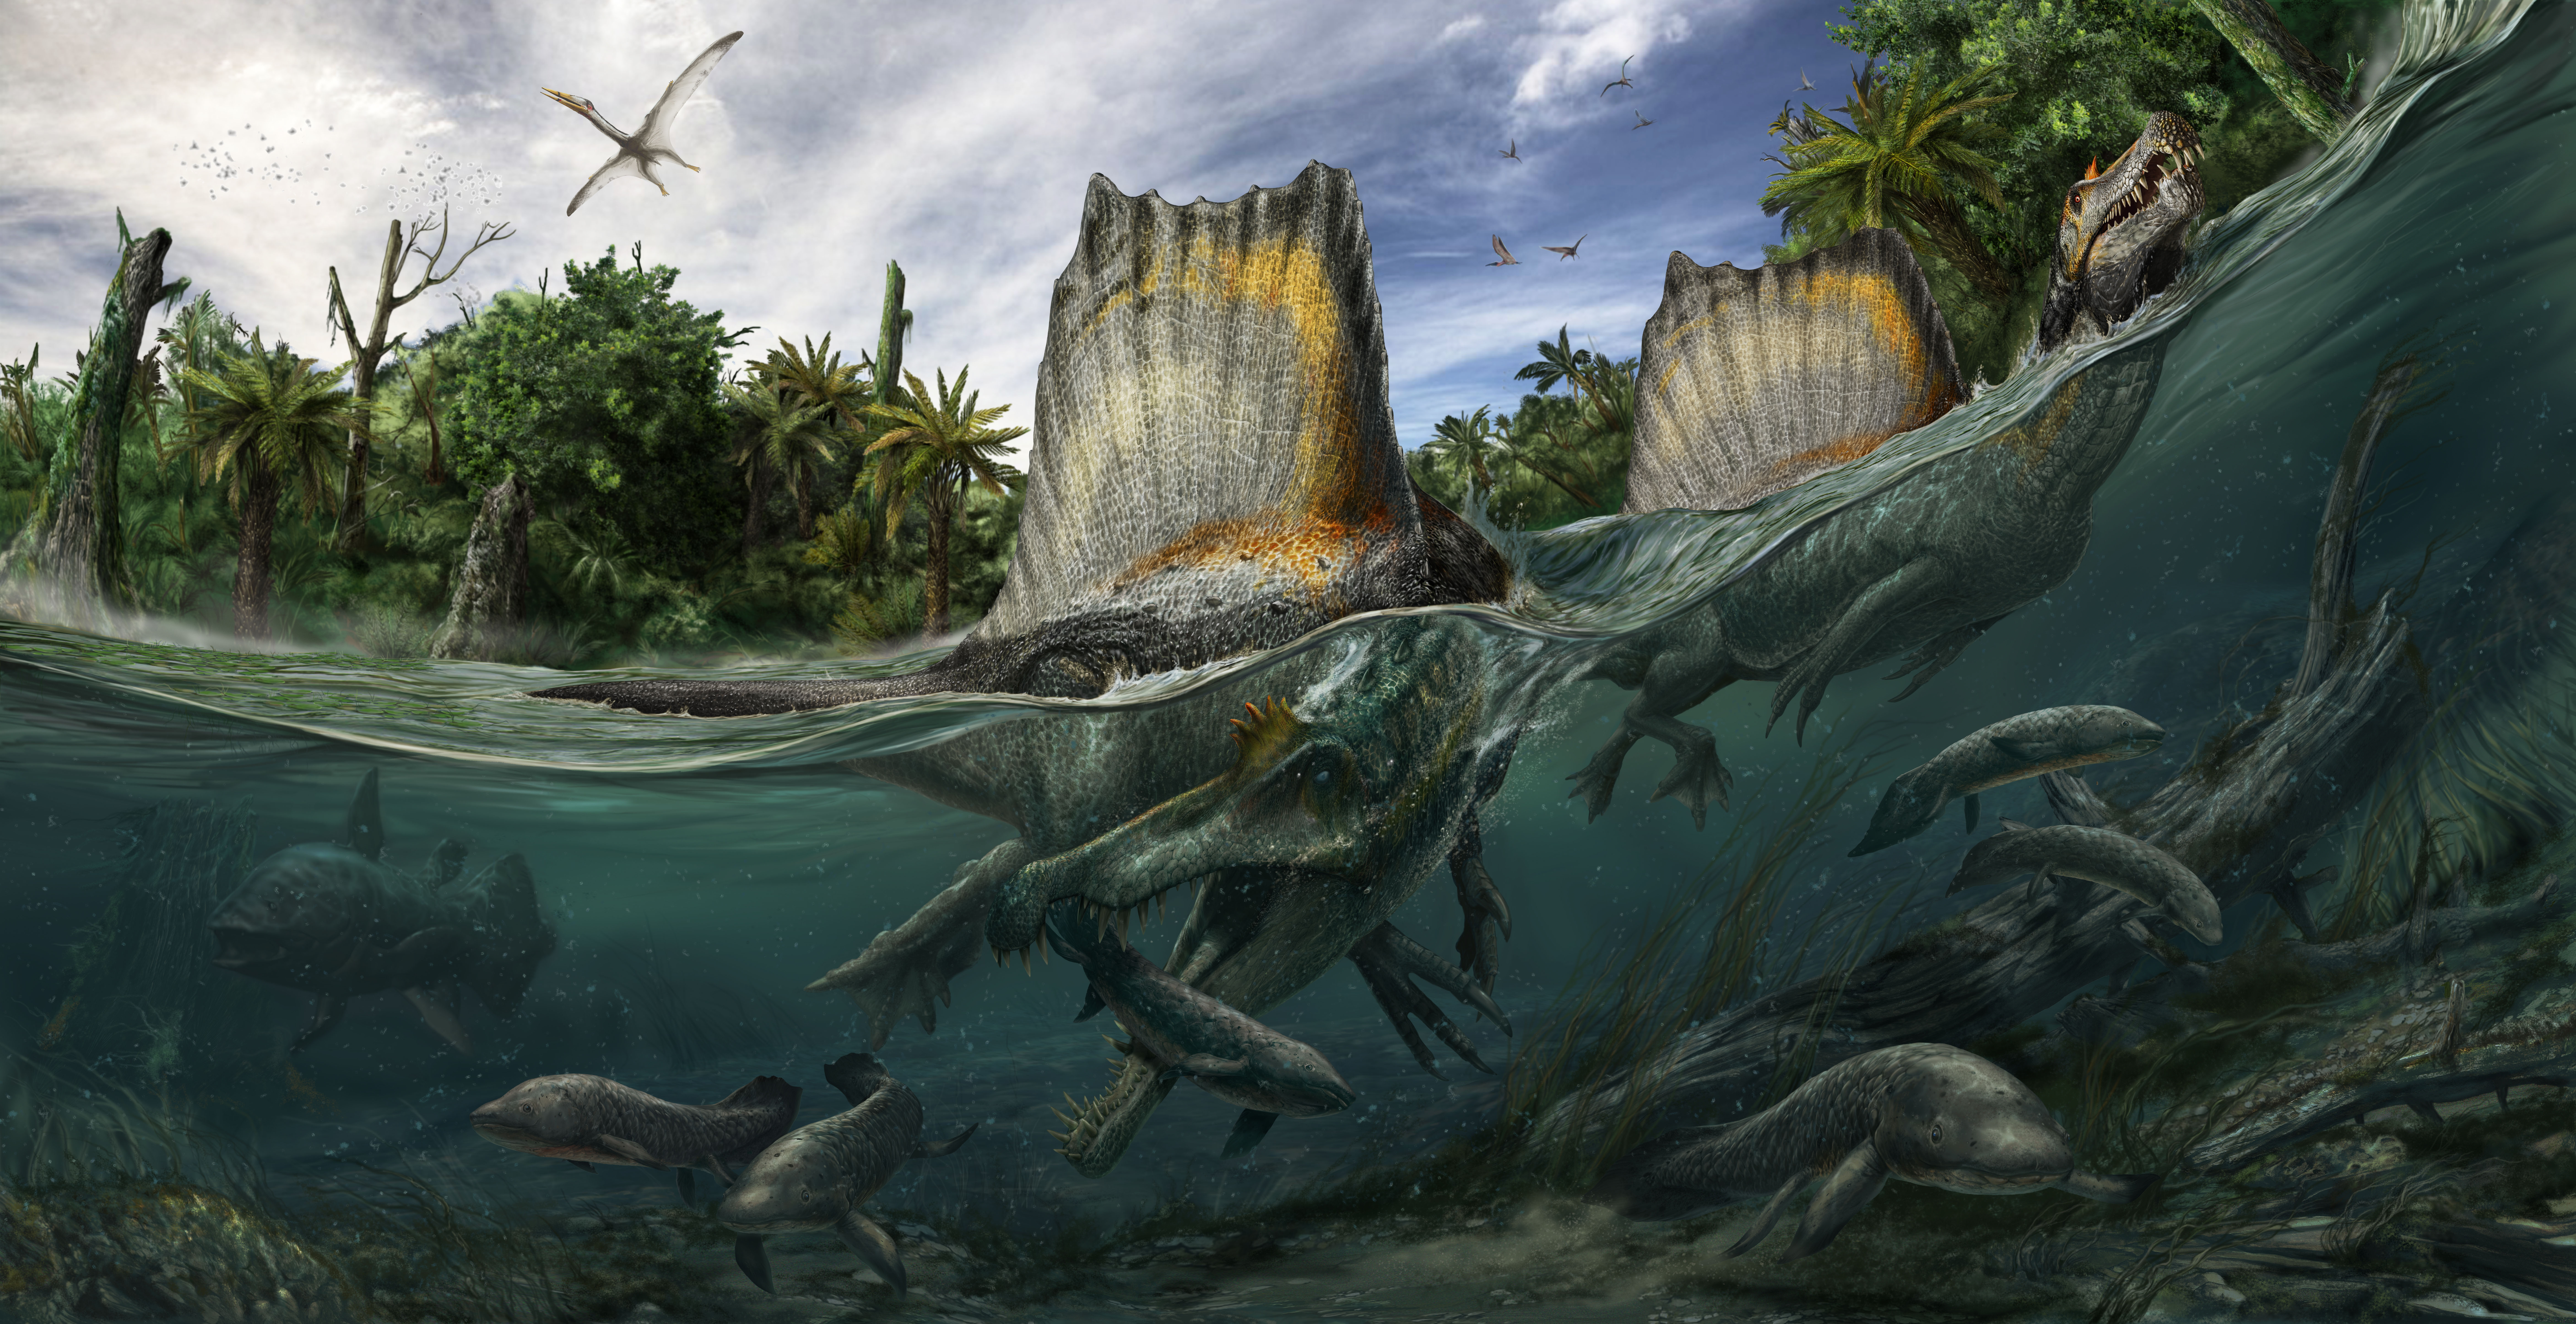 The wealth of aquatic life, including shrimp, bony fish, lungfish and giant lobe-finned coelacanths, supported a remarkable array of predators, including the fish-eating sail-backed Spinosaurus and toothless pterosaur Alanqa soaring overhead. Credit: Artwork by Davide Bonadonna License: CC-BY 4.0